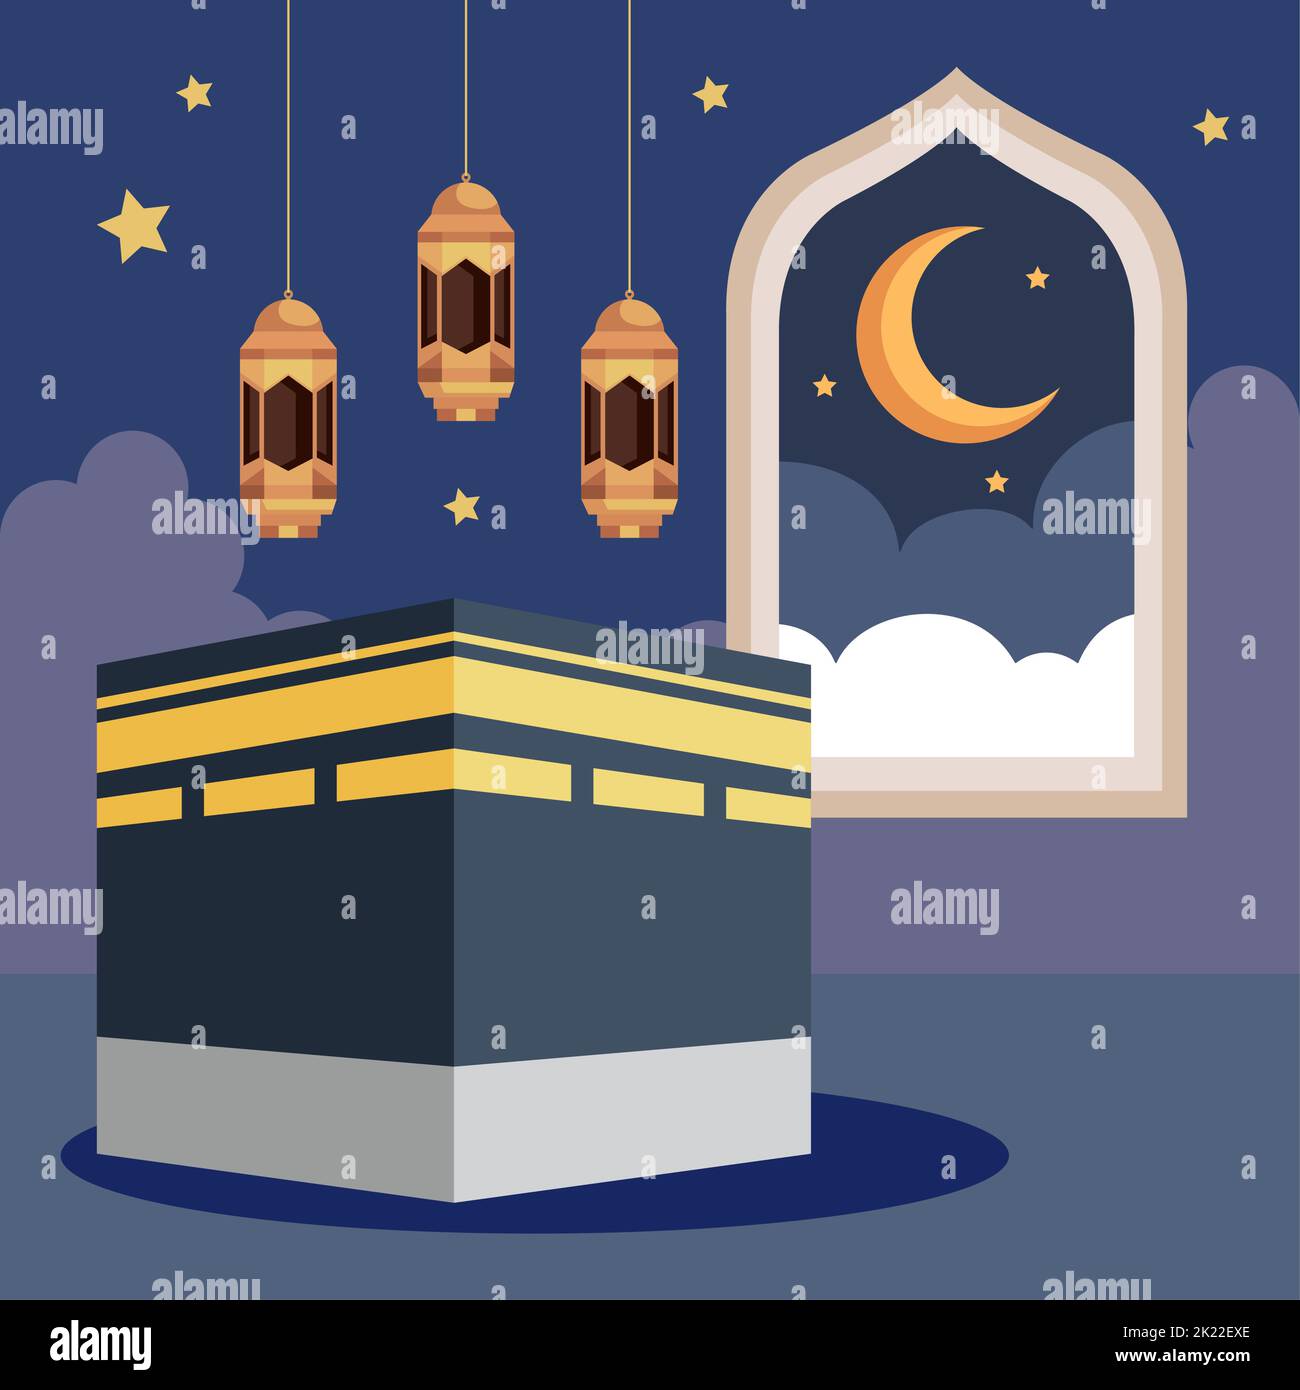 muslim culture lanterns with mecca Stock Vector